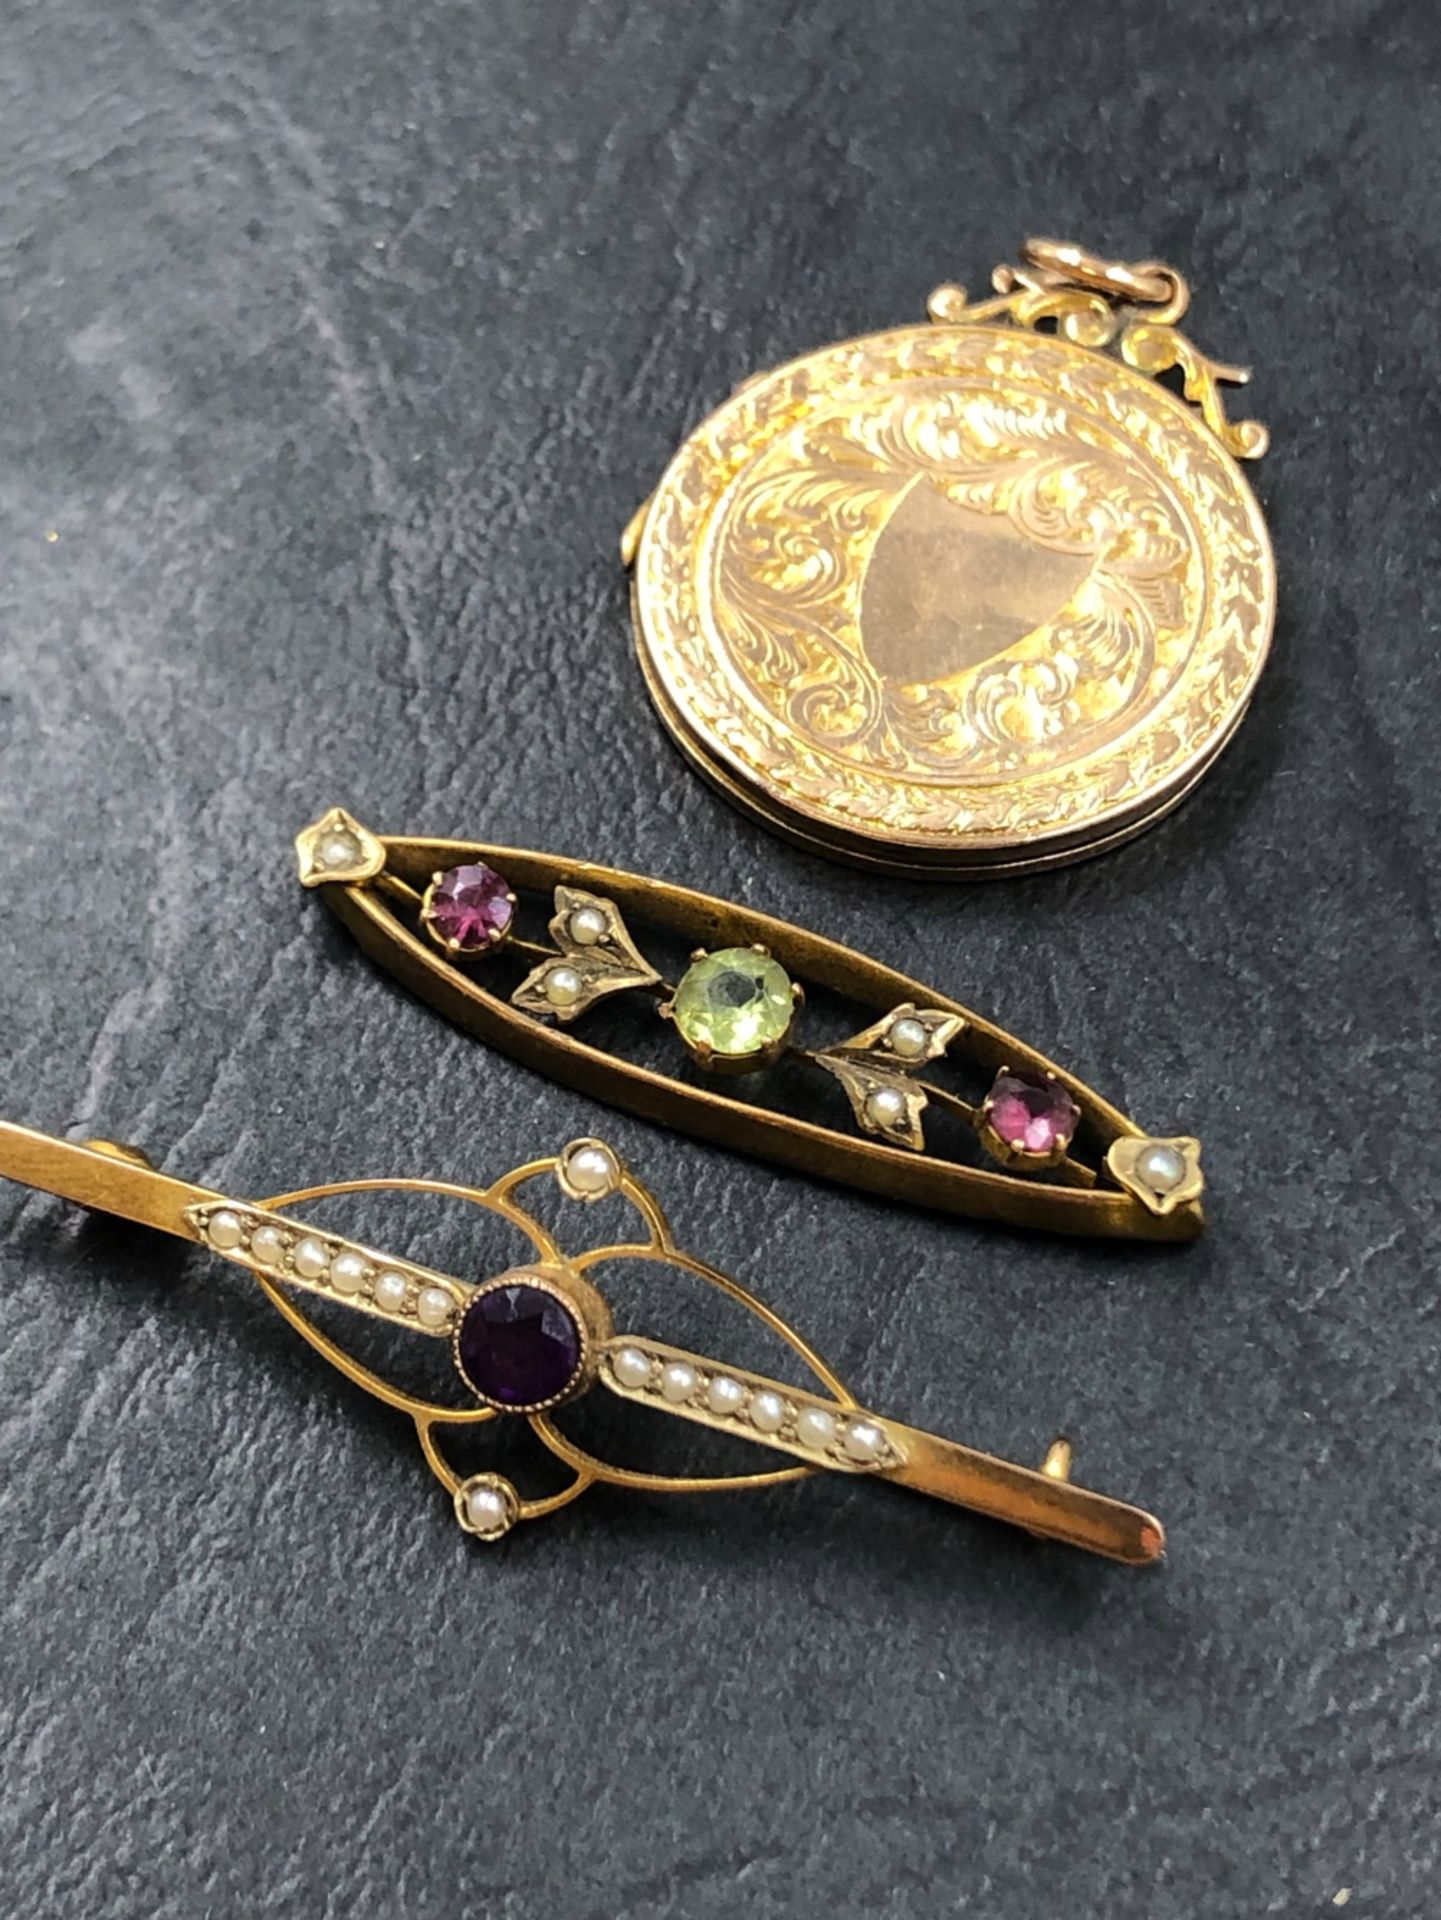 A 9ct GOLD HALLMARKED EDWARDIAN BAR BROOCH, OF SUFFRAGETTE INFLUENCE, FOR C M WRIGHTON, CHESTER - Image 2 of 3